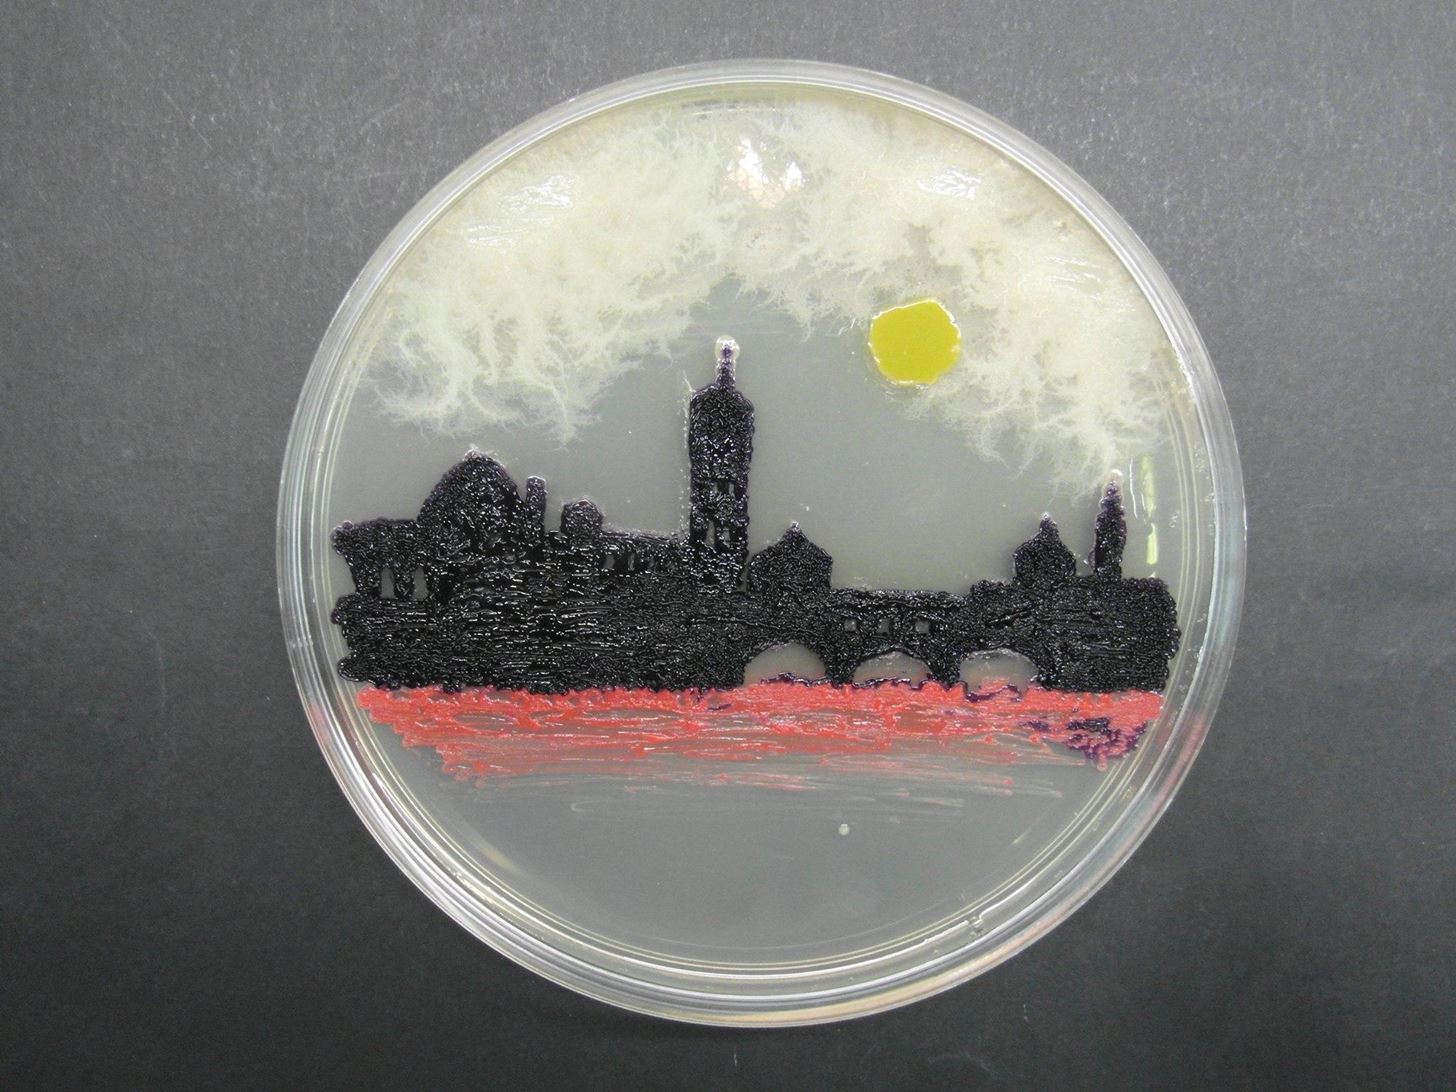 Our 11 Favorite Bacteria Art Submissions from ASM's Petri-Dish Picasso Contest